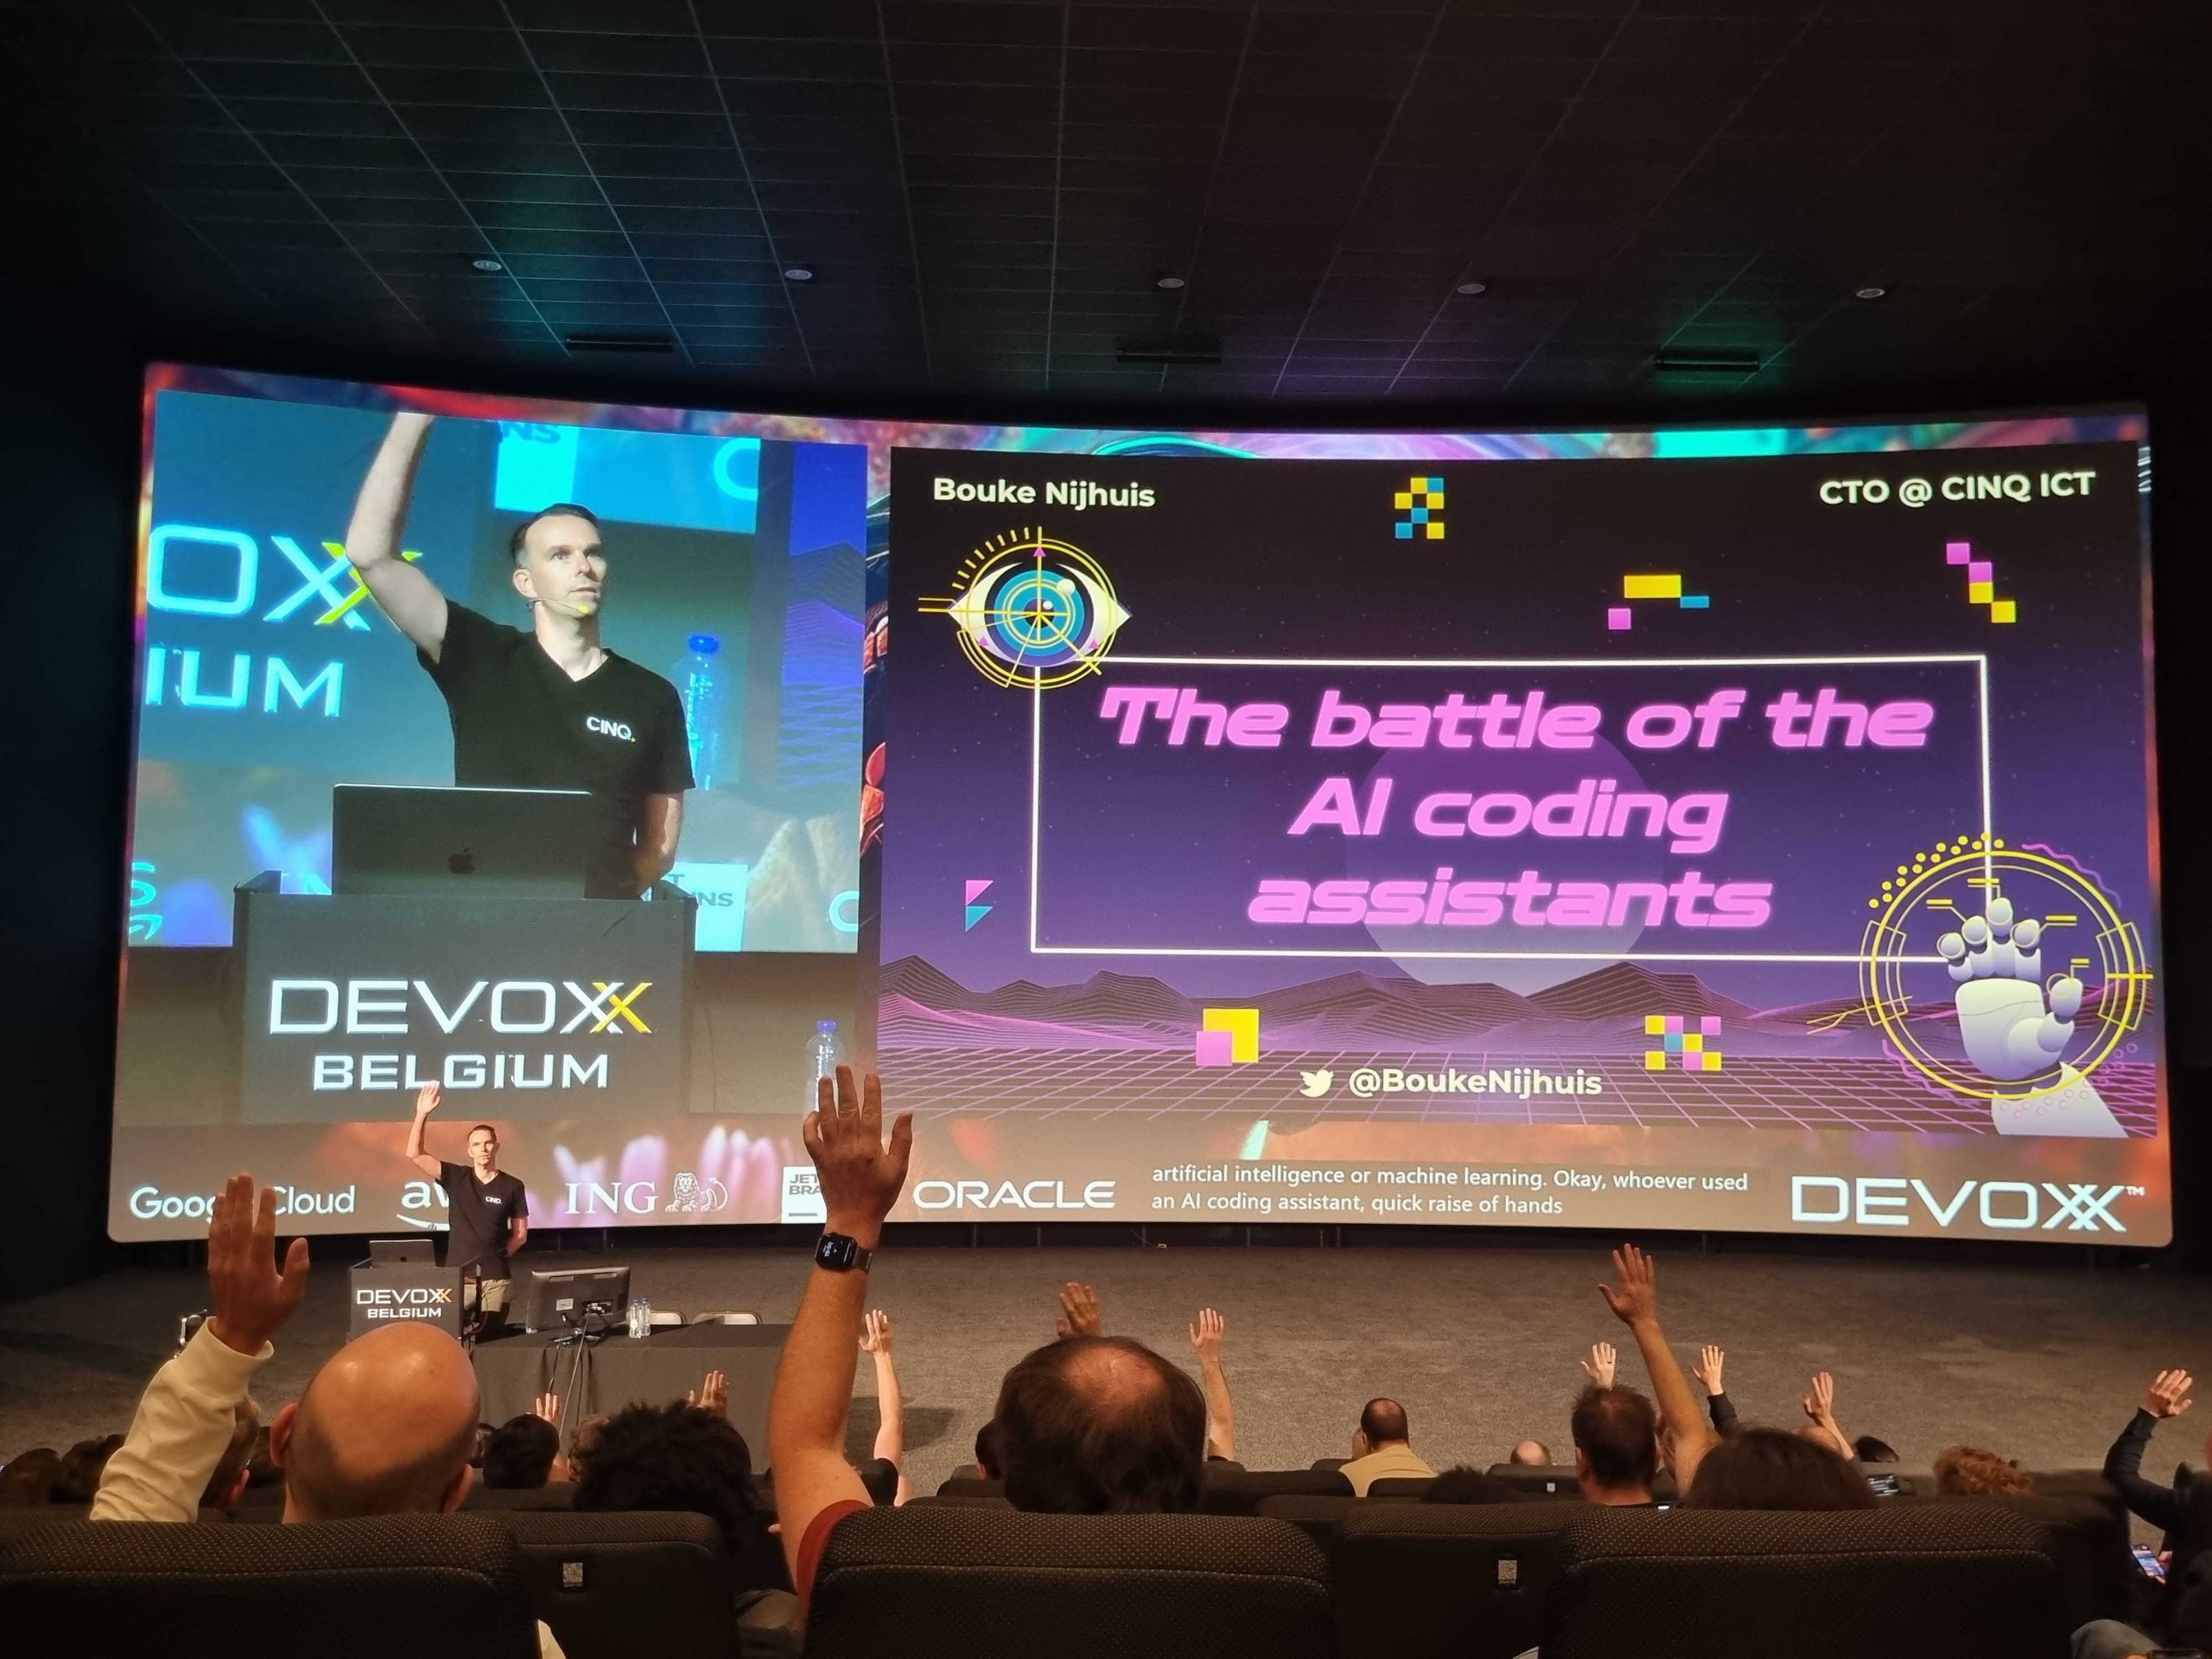 A presenter with one arm raised behind podium with screen titling "Battle of the AI Coding Assistants".